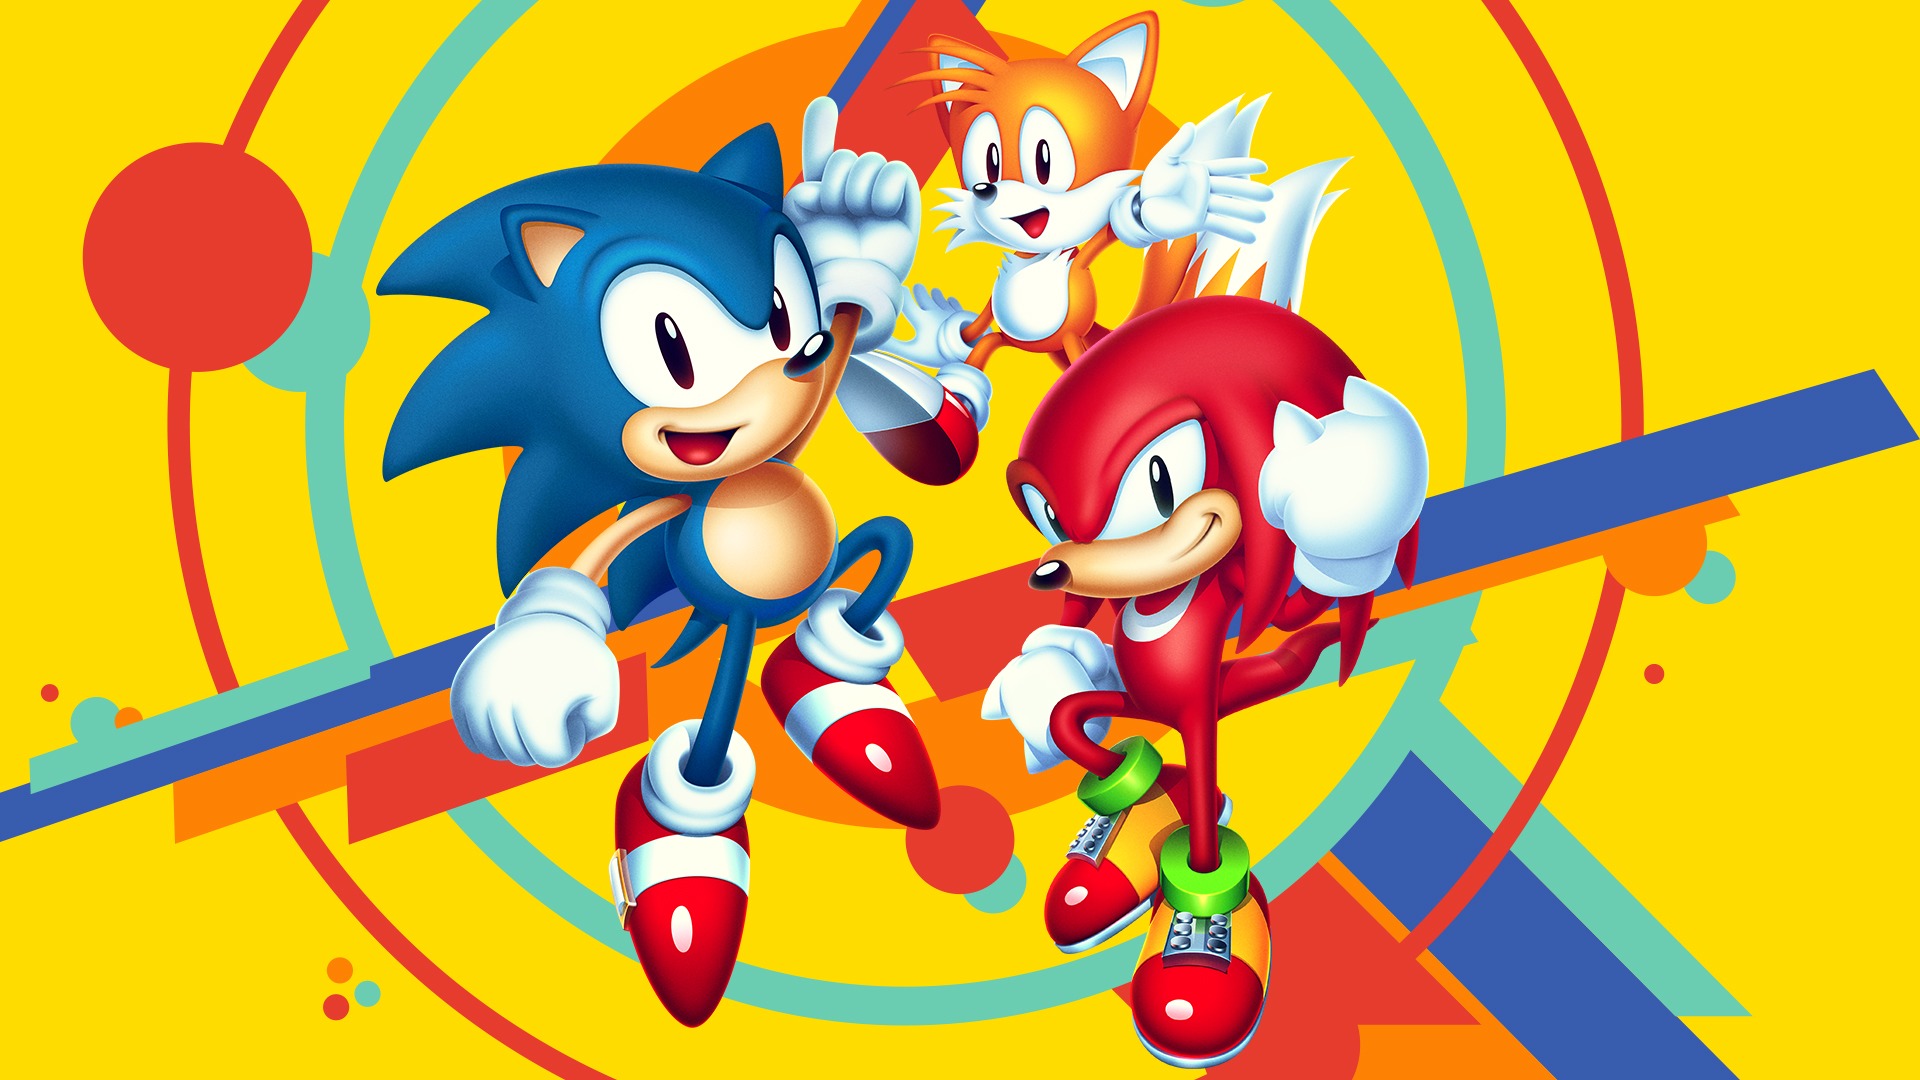 sonic mania steam page